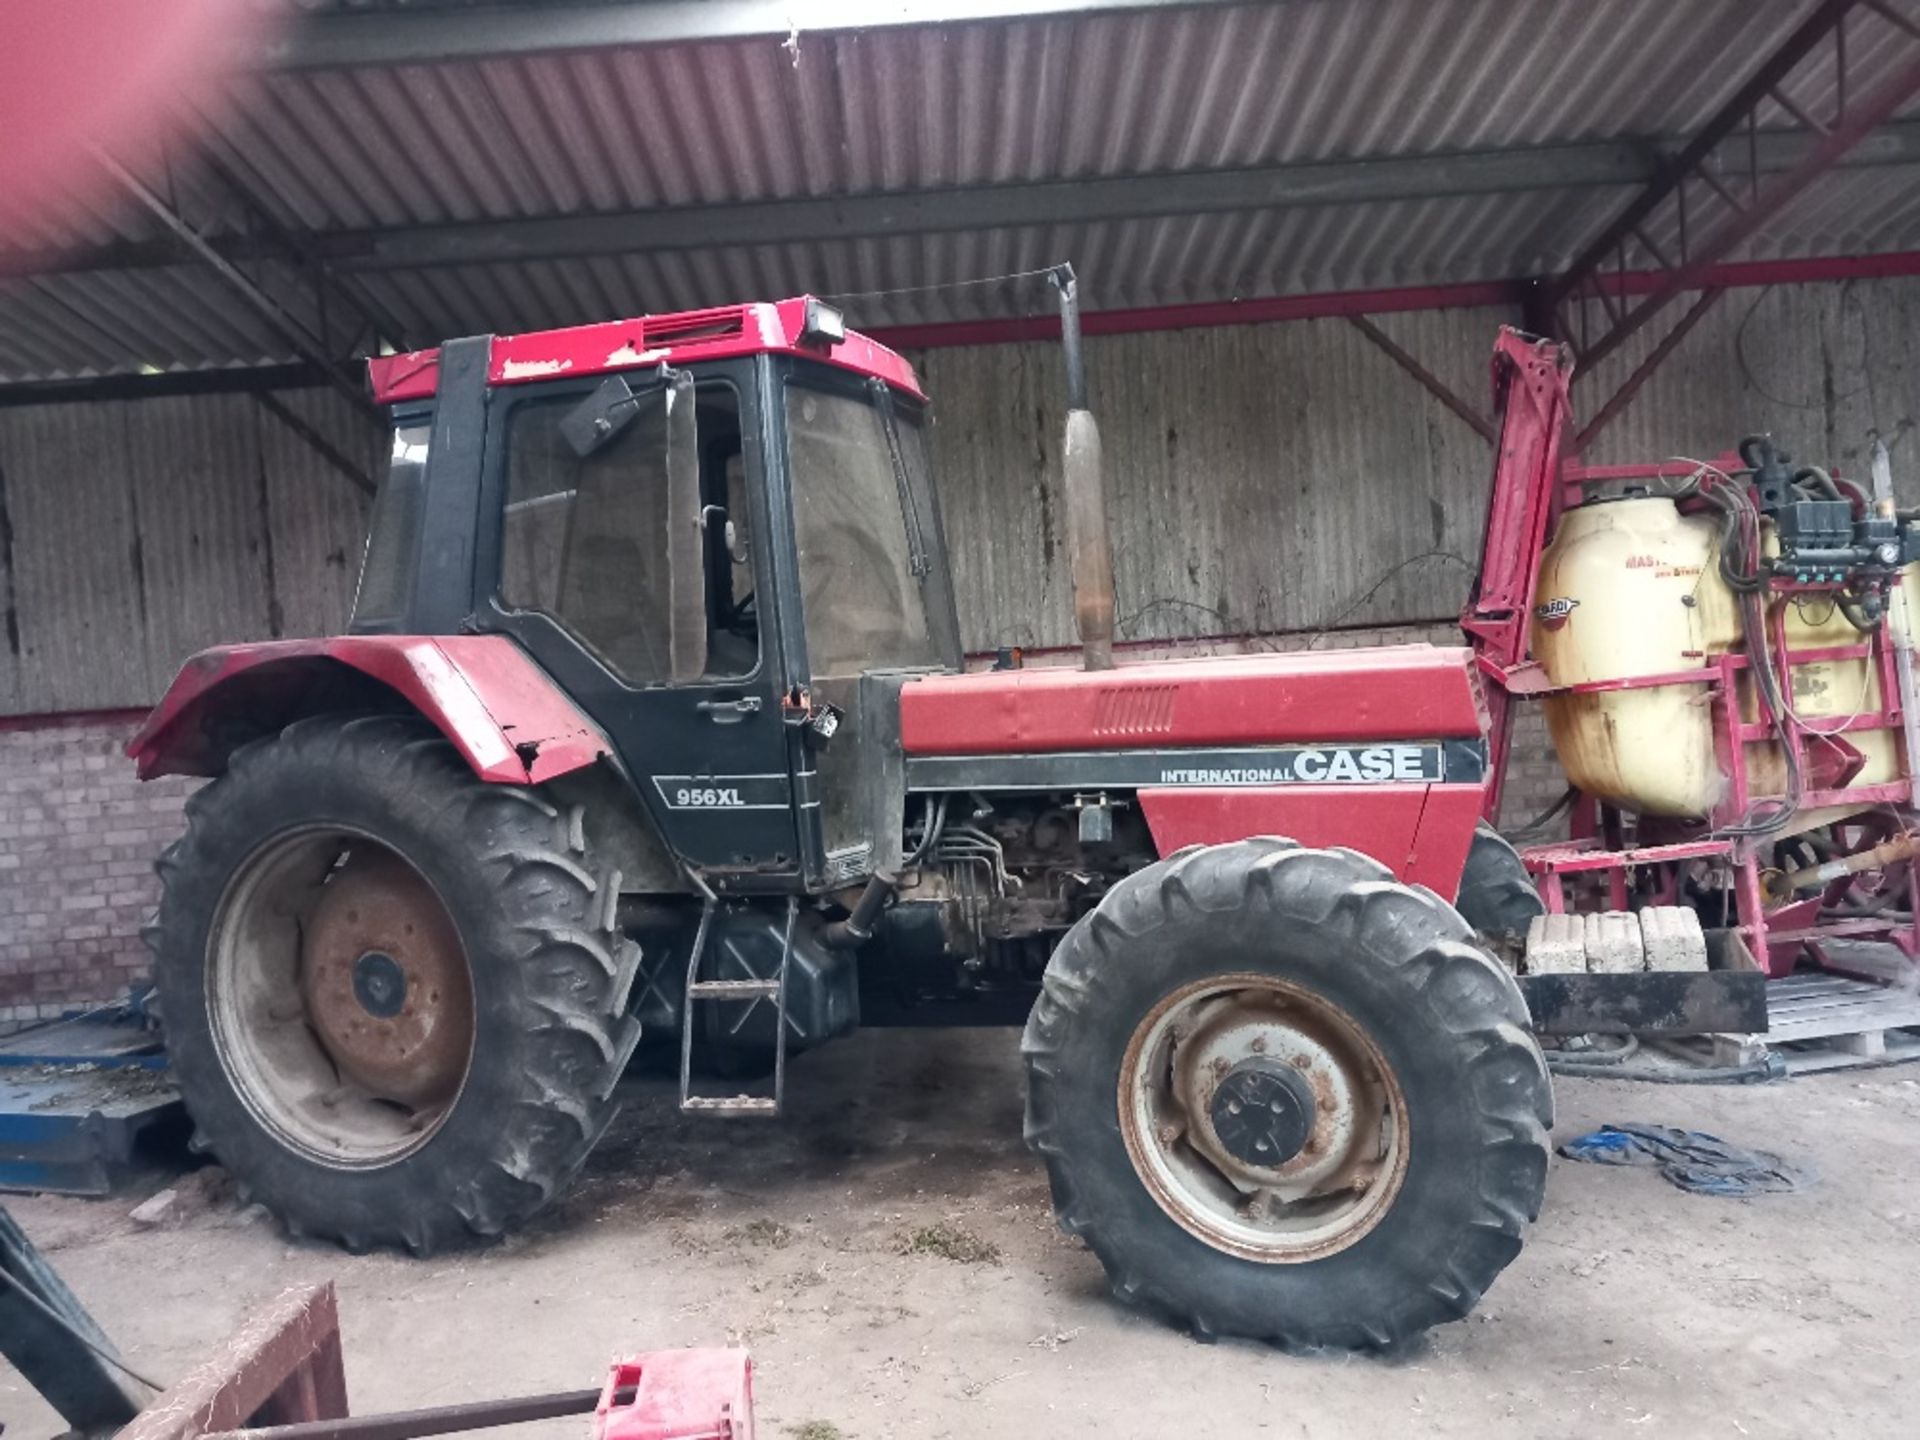 Case International Tractor 956XL, 4wd, Reg: F802 RPV, 5,700 hours, - Image 11 of 14